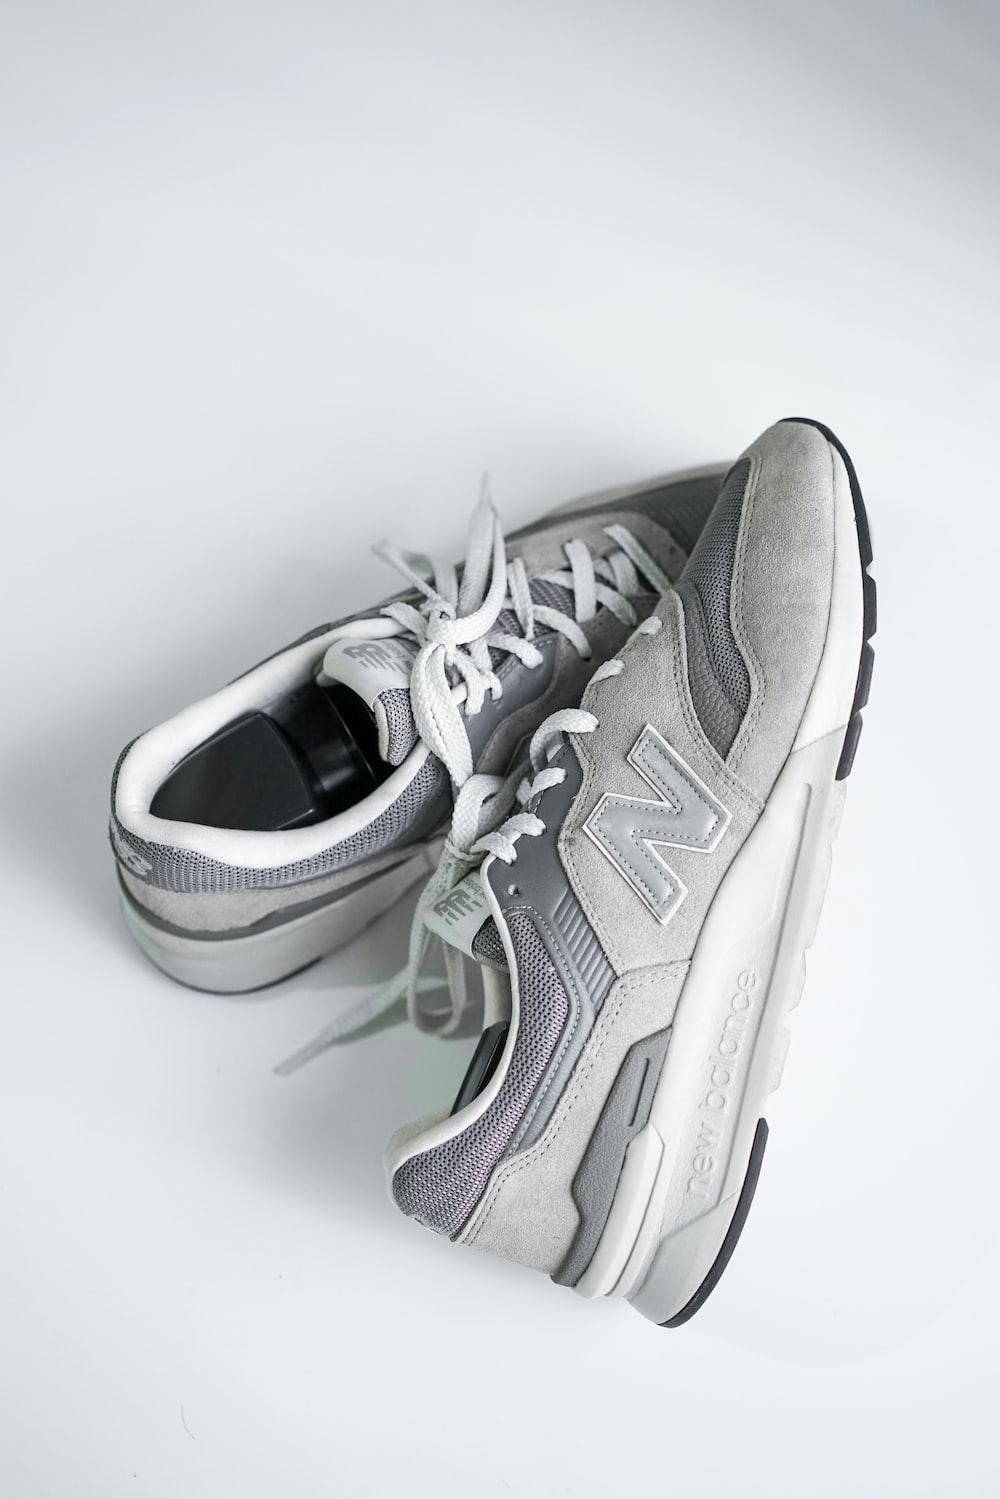 New Balance Pictures Download Free Images on